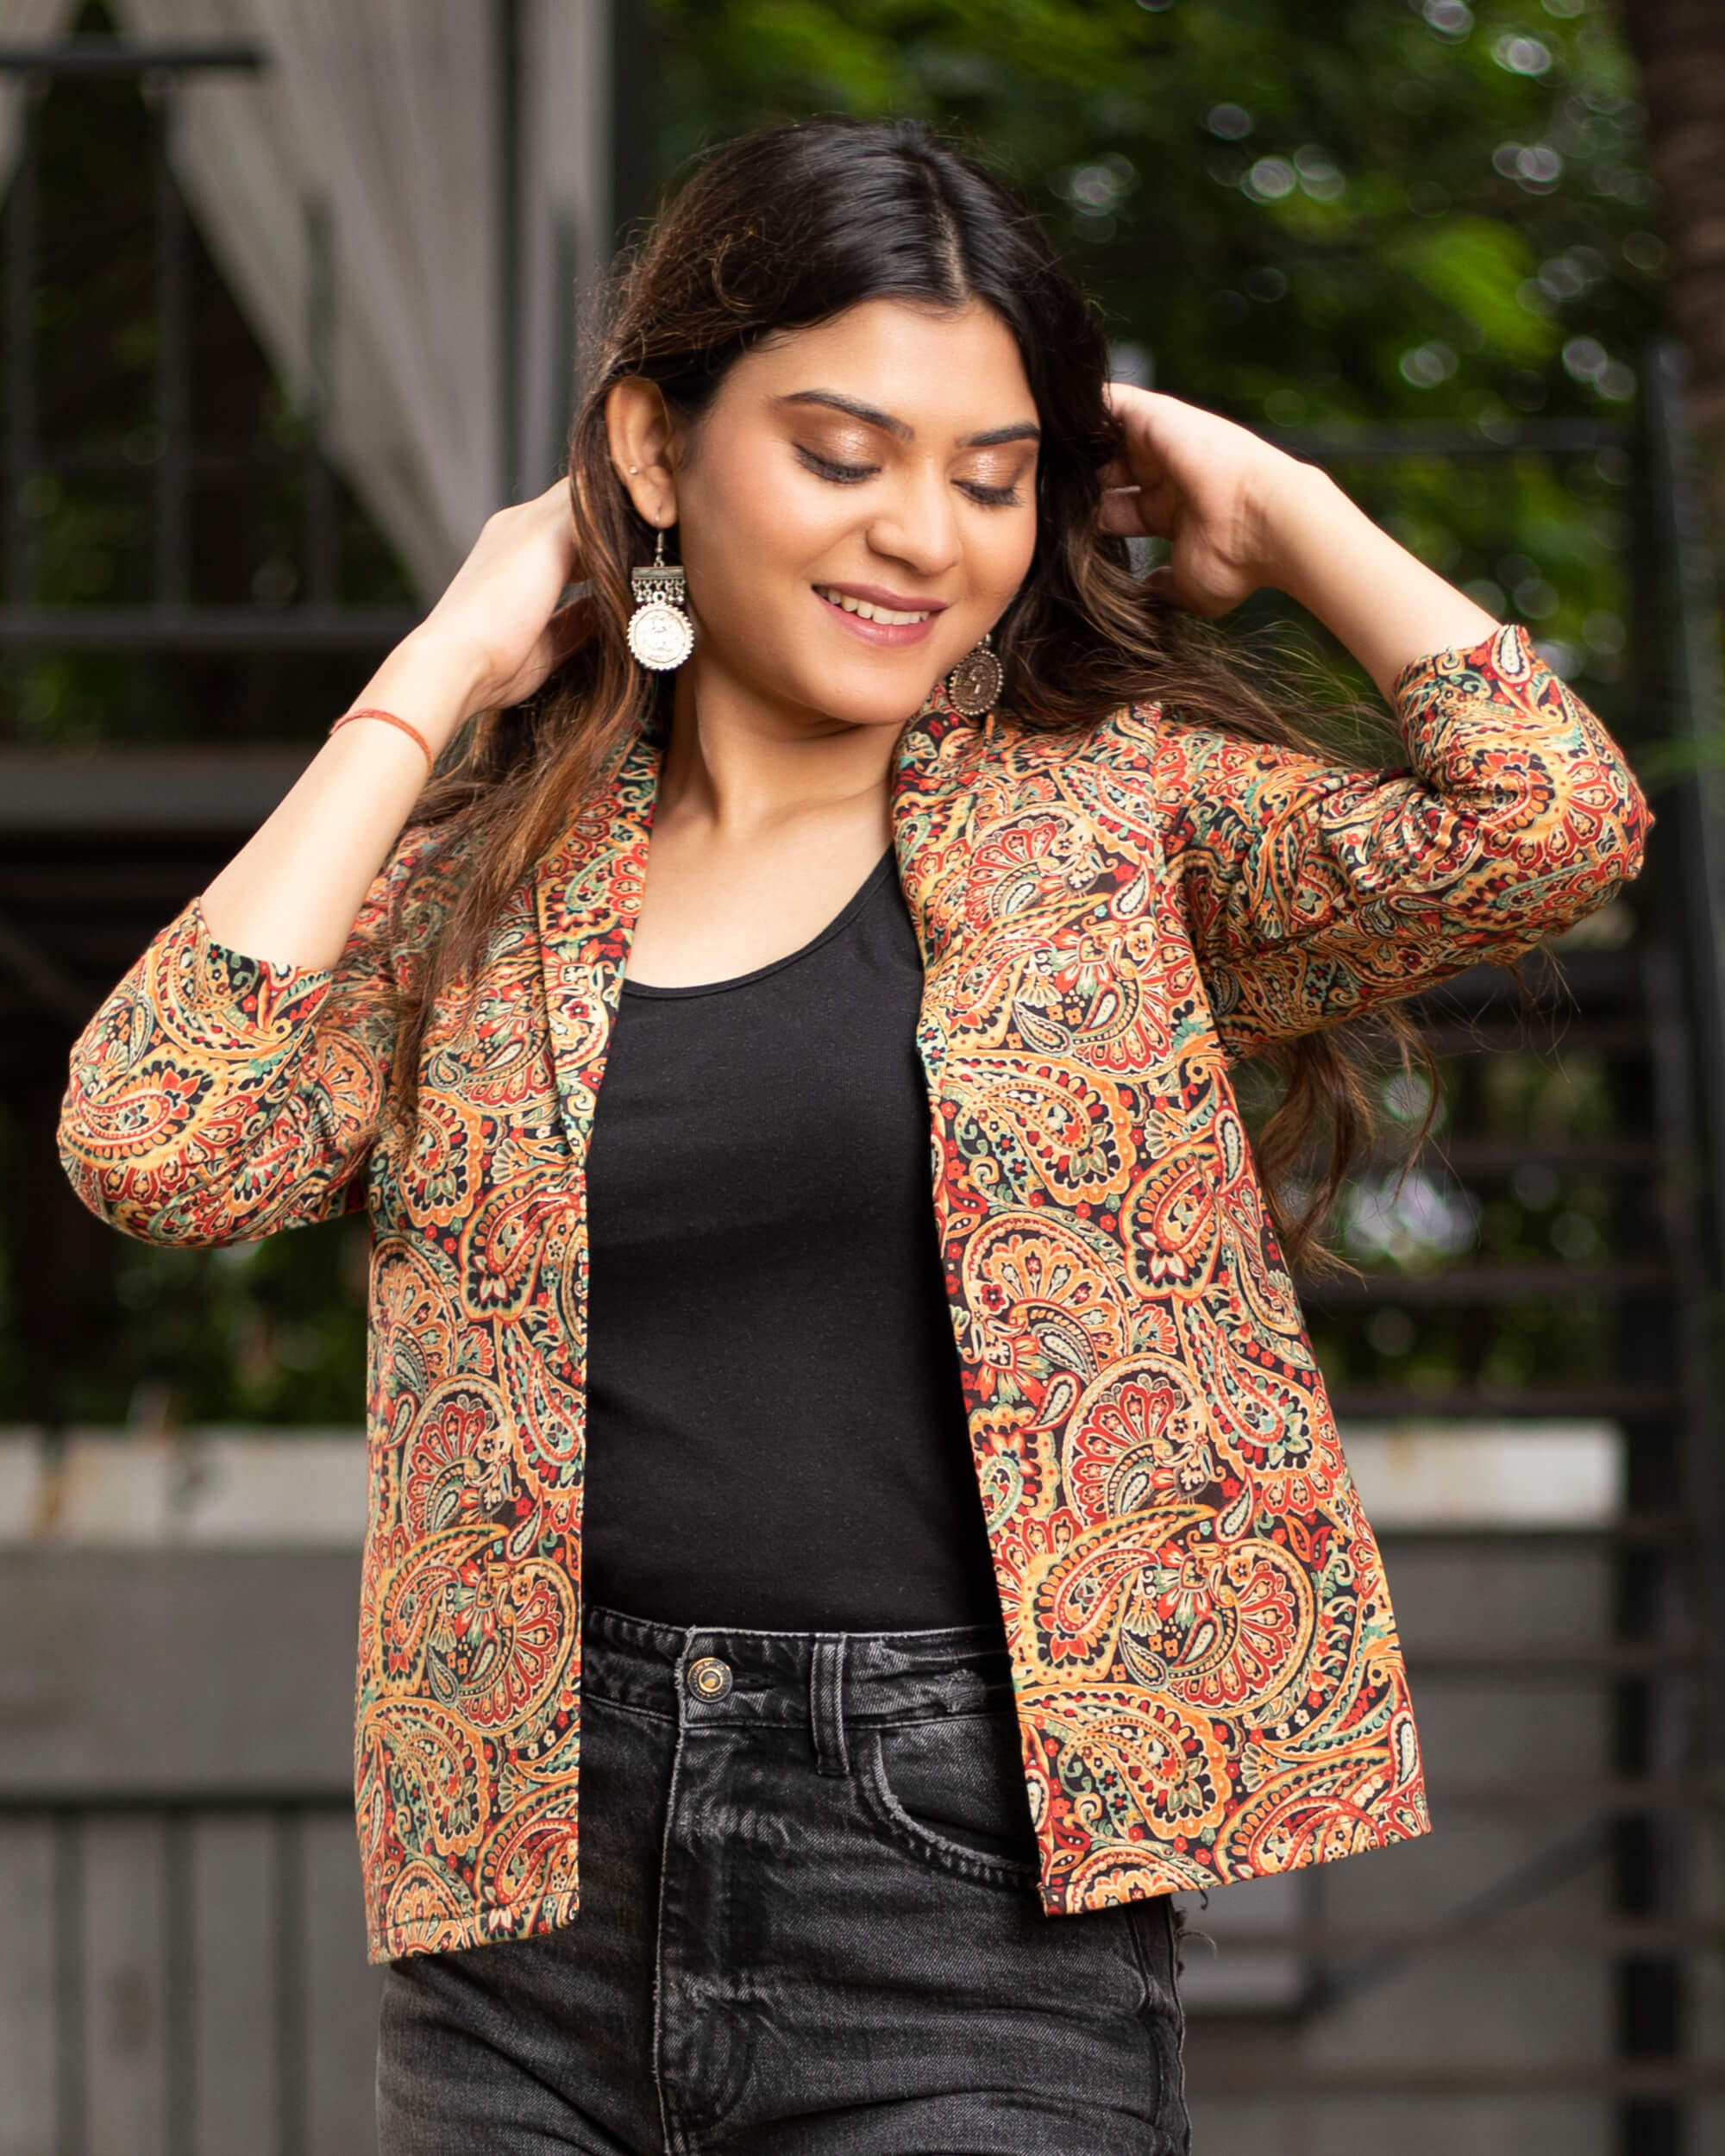 Multicolor Embroidery on Ladies Jacket - Size - S Length - 19 in. | Jackets  for women, Kurta designs women, Embroidery jackets